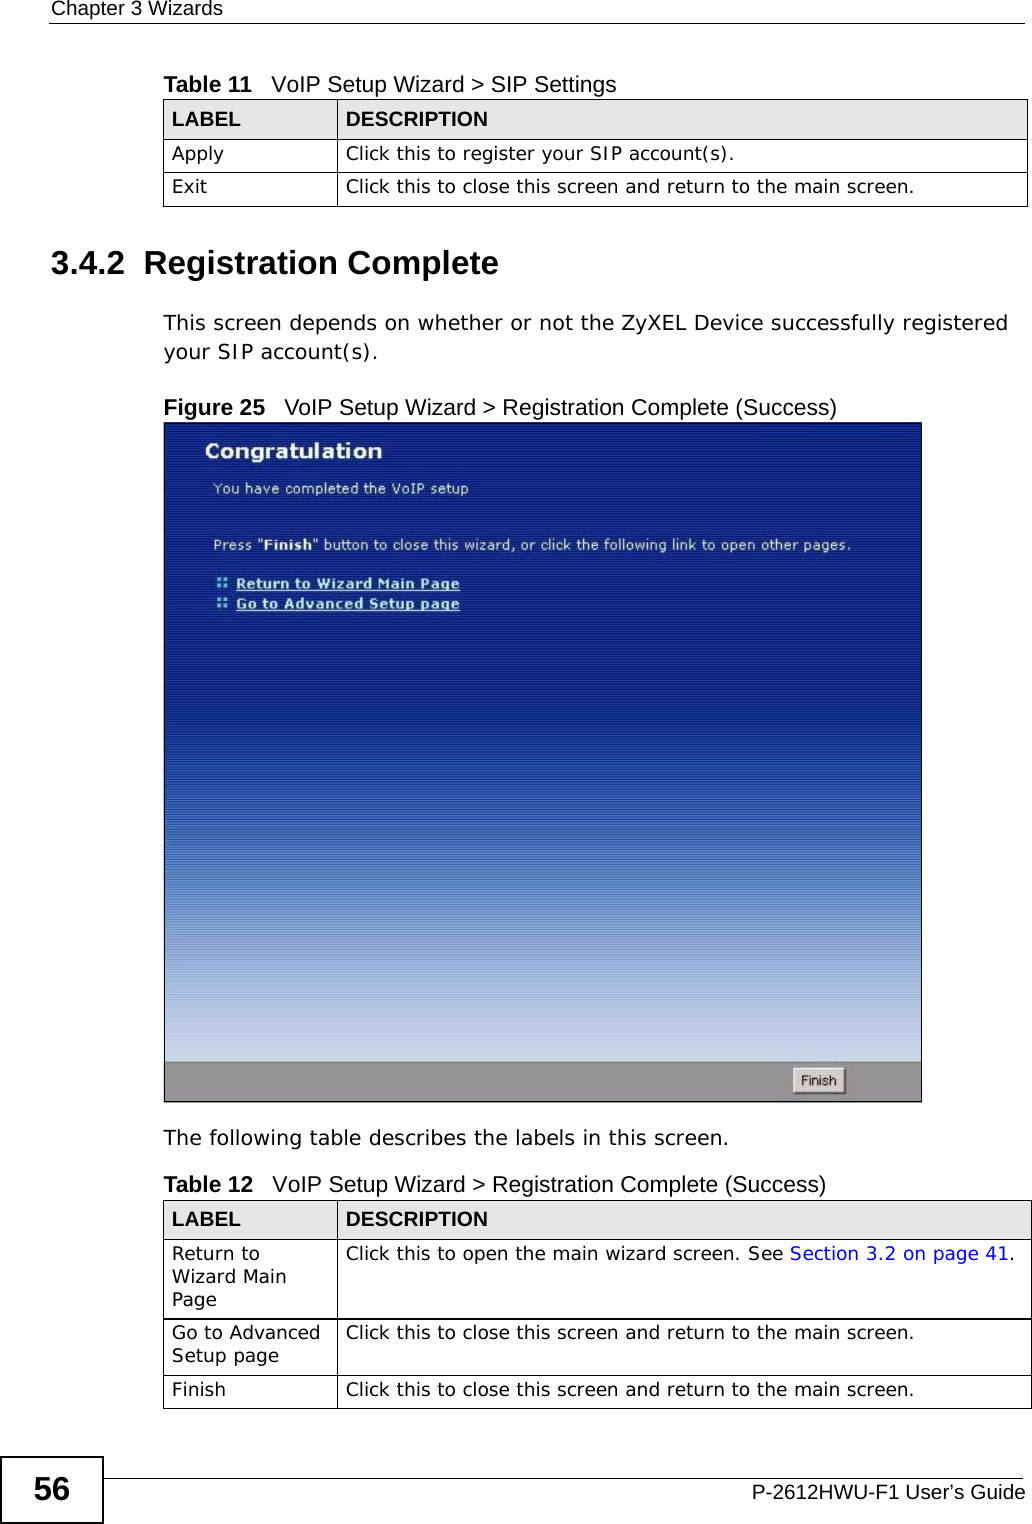 Chapter 3 WizardsP-2612HWU-F1 User’s Guide563.4.2  Registration CompleteThis screen depends on whether or not the ZyXEL Device successfully registered your SIP account(s).Figure 25   VoIP Setup Wizard &gt; Registration Complete (Success)The following table describes the labels in this screen.Apply Click this to register your SIP account(s).Exit Click this to close this screen and return to the main screen.Table 11   VoIP Setup Wizard &gt; SIP SettingsLABEL DESCRIPTIONTable 12   VoIP Setup Wizard &gt; Registration Complete (Success)LABEL DESCRIPTIONReturn to Wizard Main PageClick this to open the main wizard screen. See Section 3.2 on page 41.Go to Advanced Setup page Click this to close this screen and return to the main screen.Finish Click this to close this screen and return to the main screen.